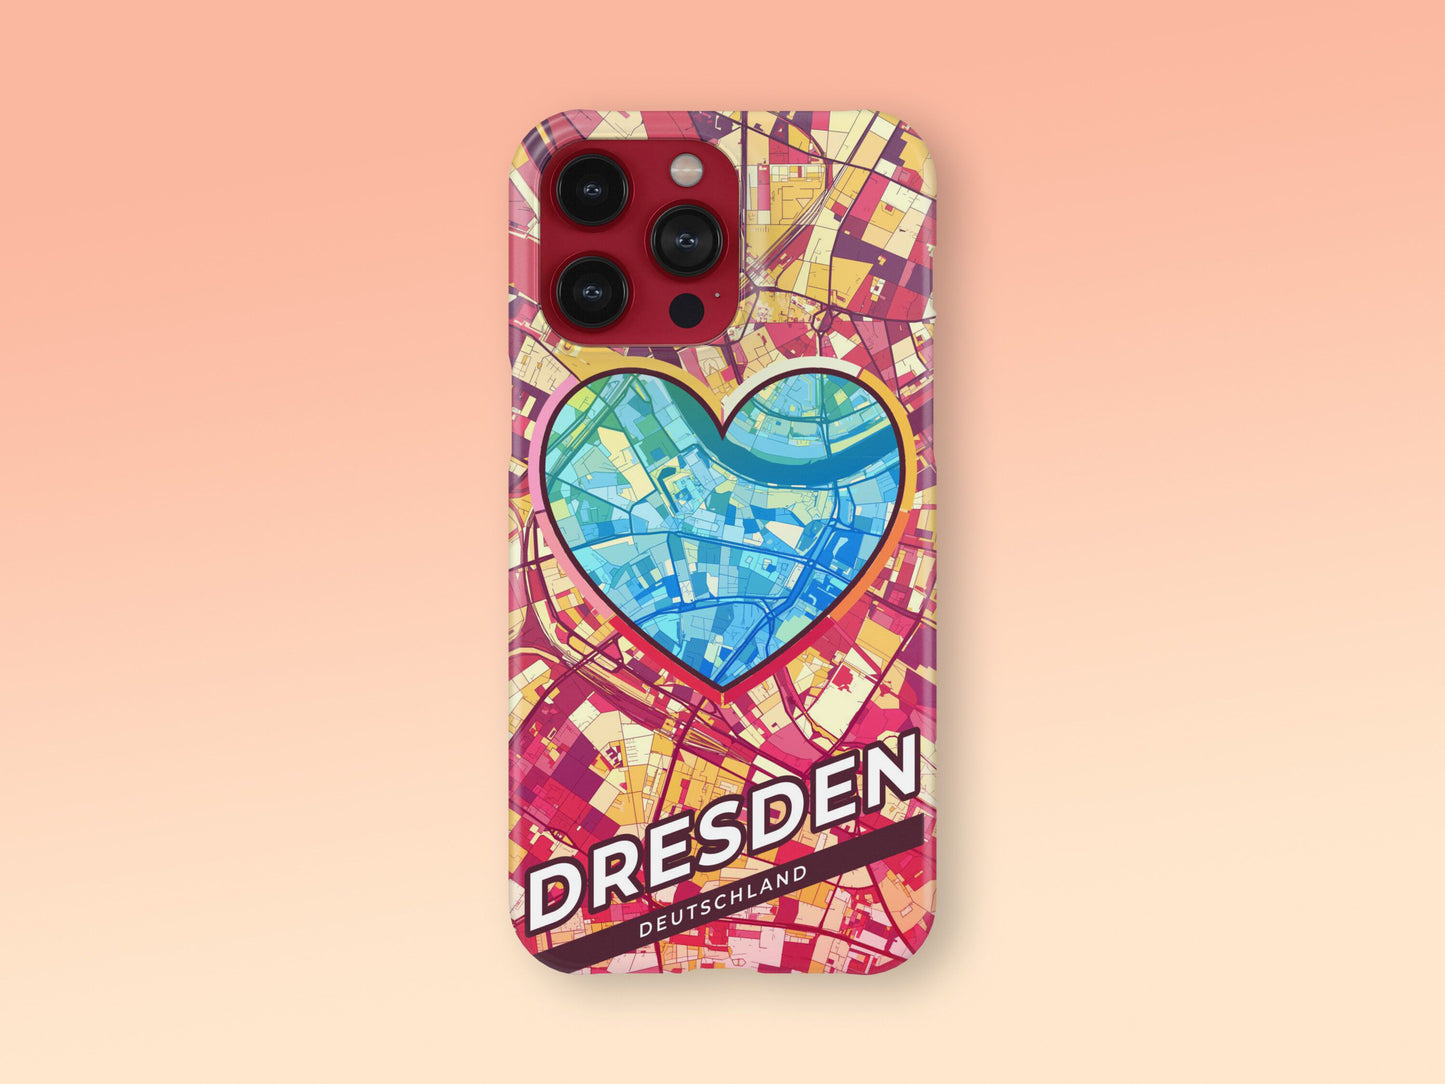 Dresden Deutschland slim phone case with colorful icon. Birthday, wedding or housewarming gift. Couple match cases. 2